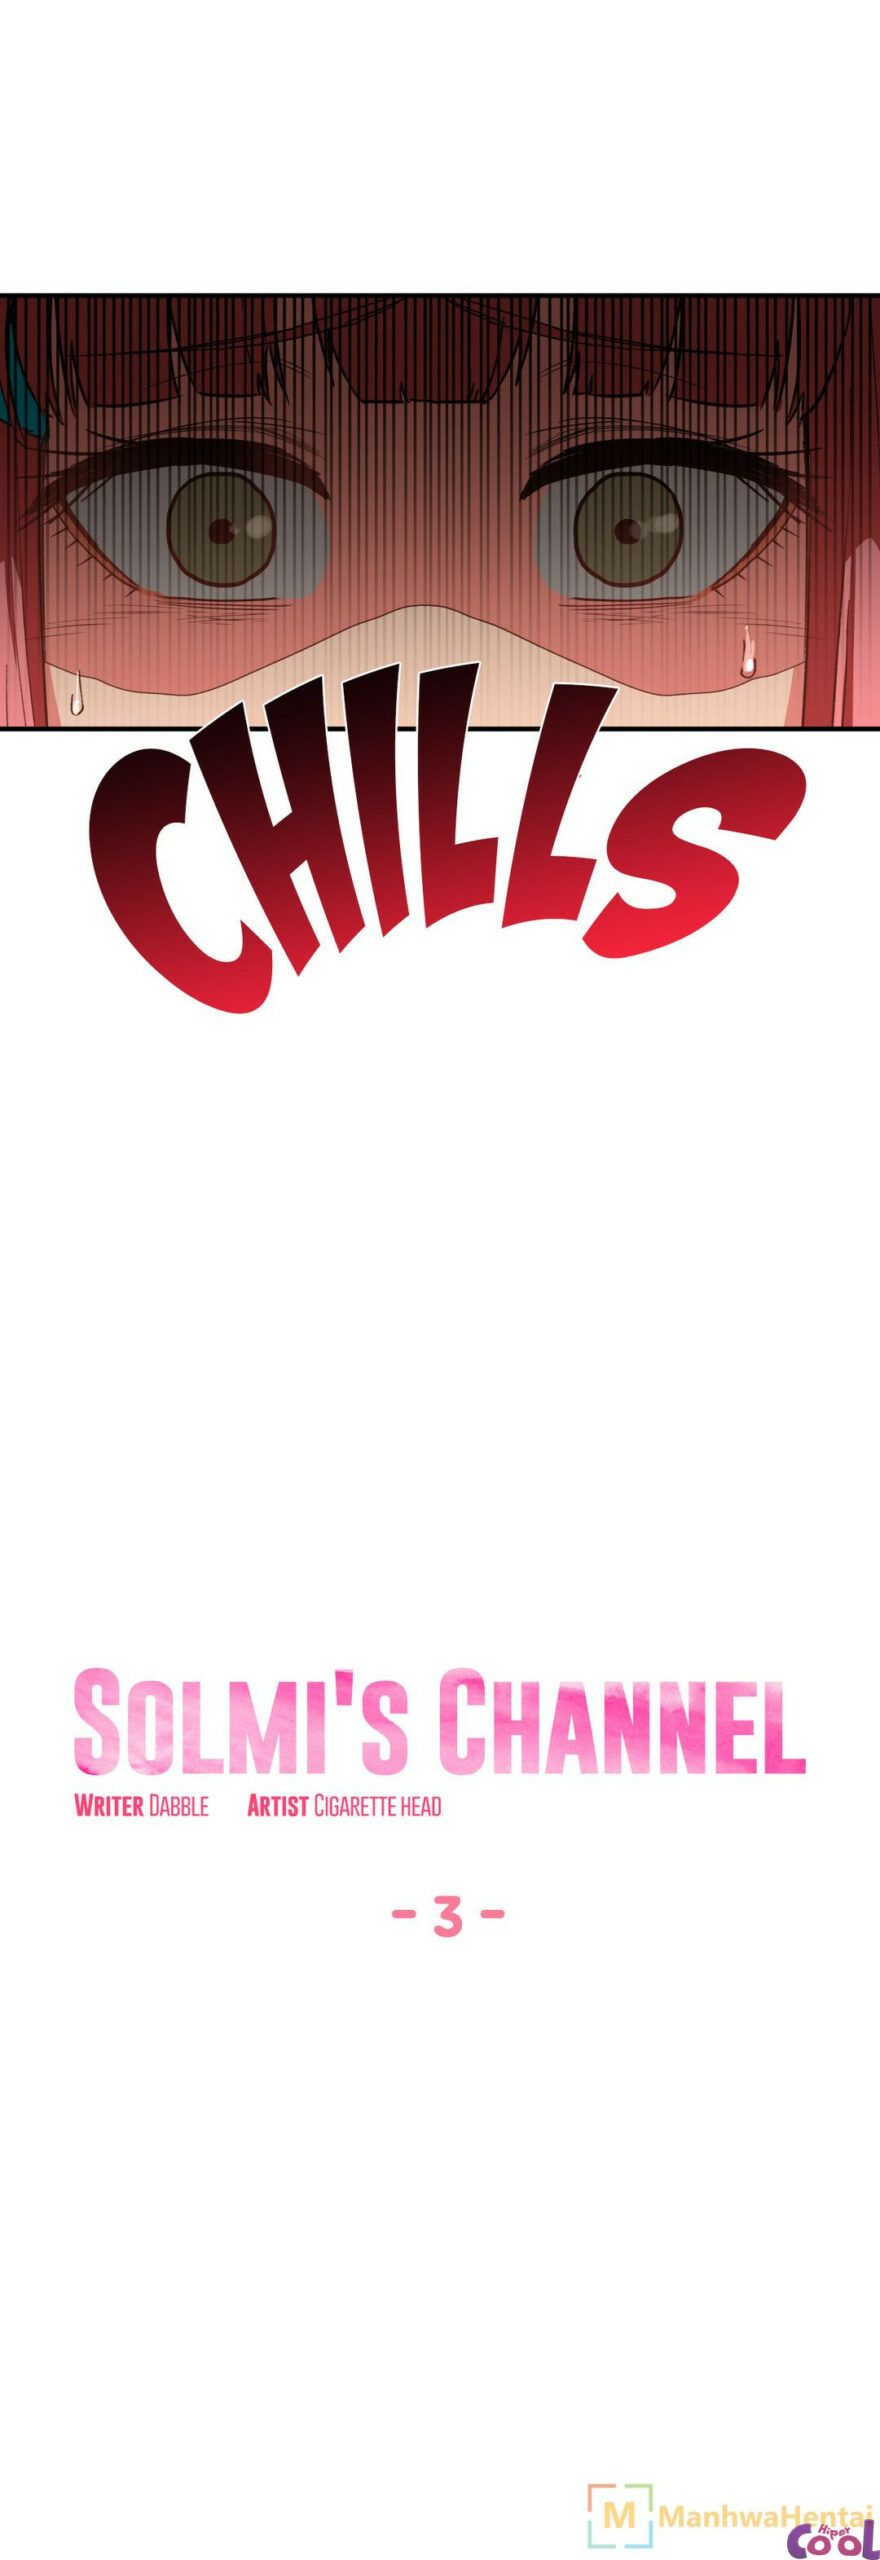 Solmis Channel 3